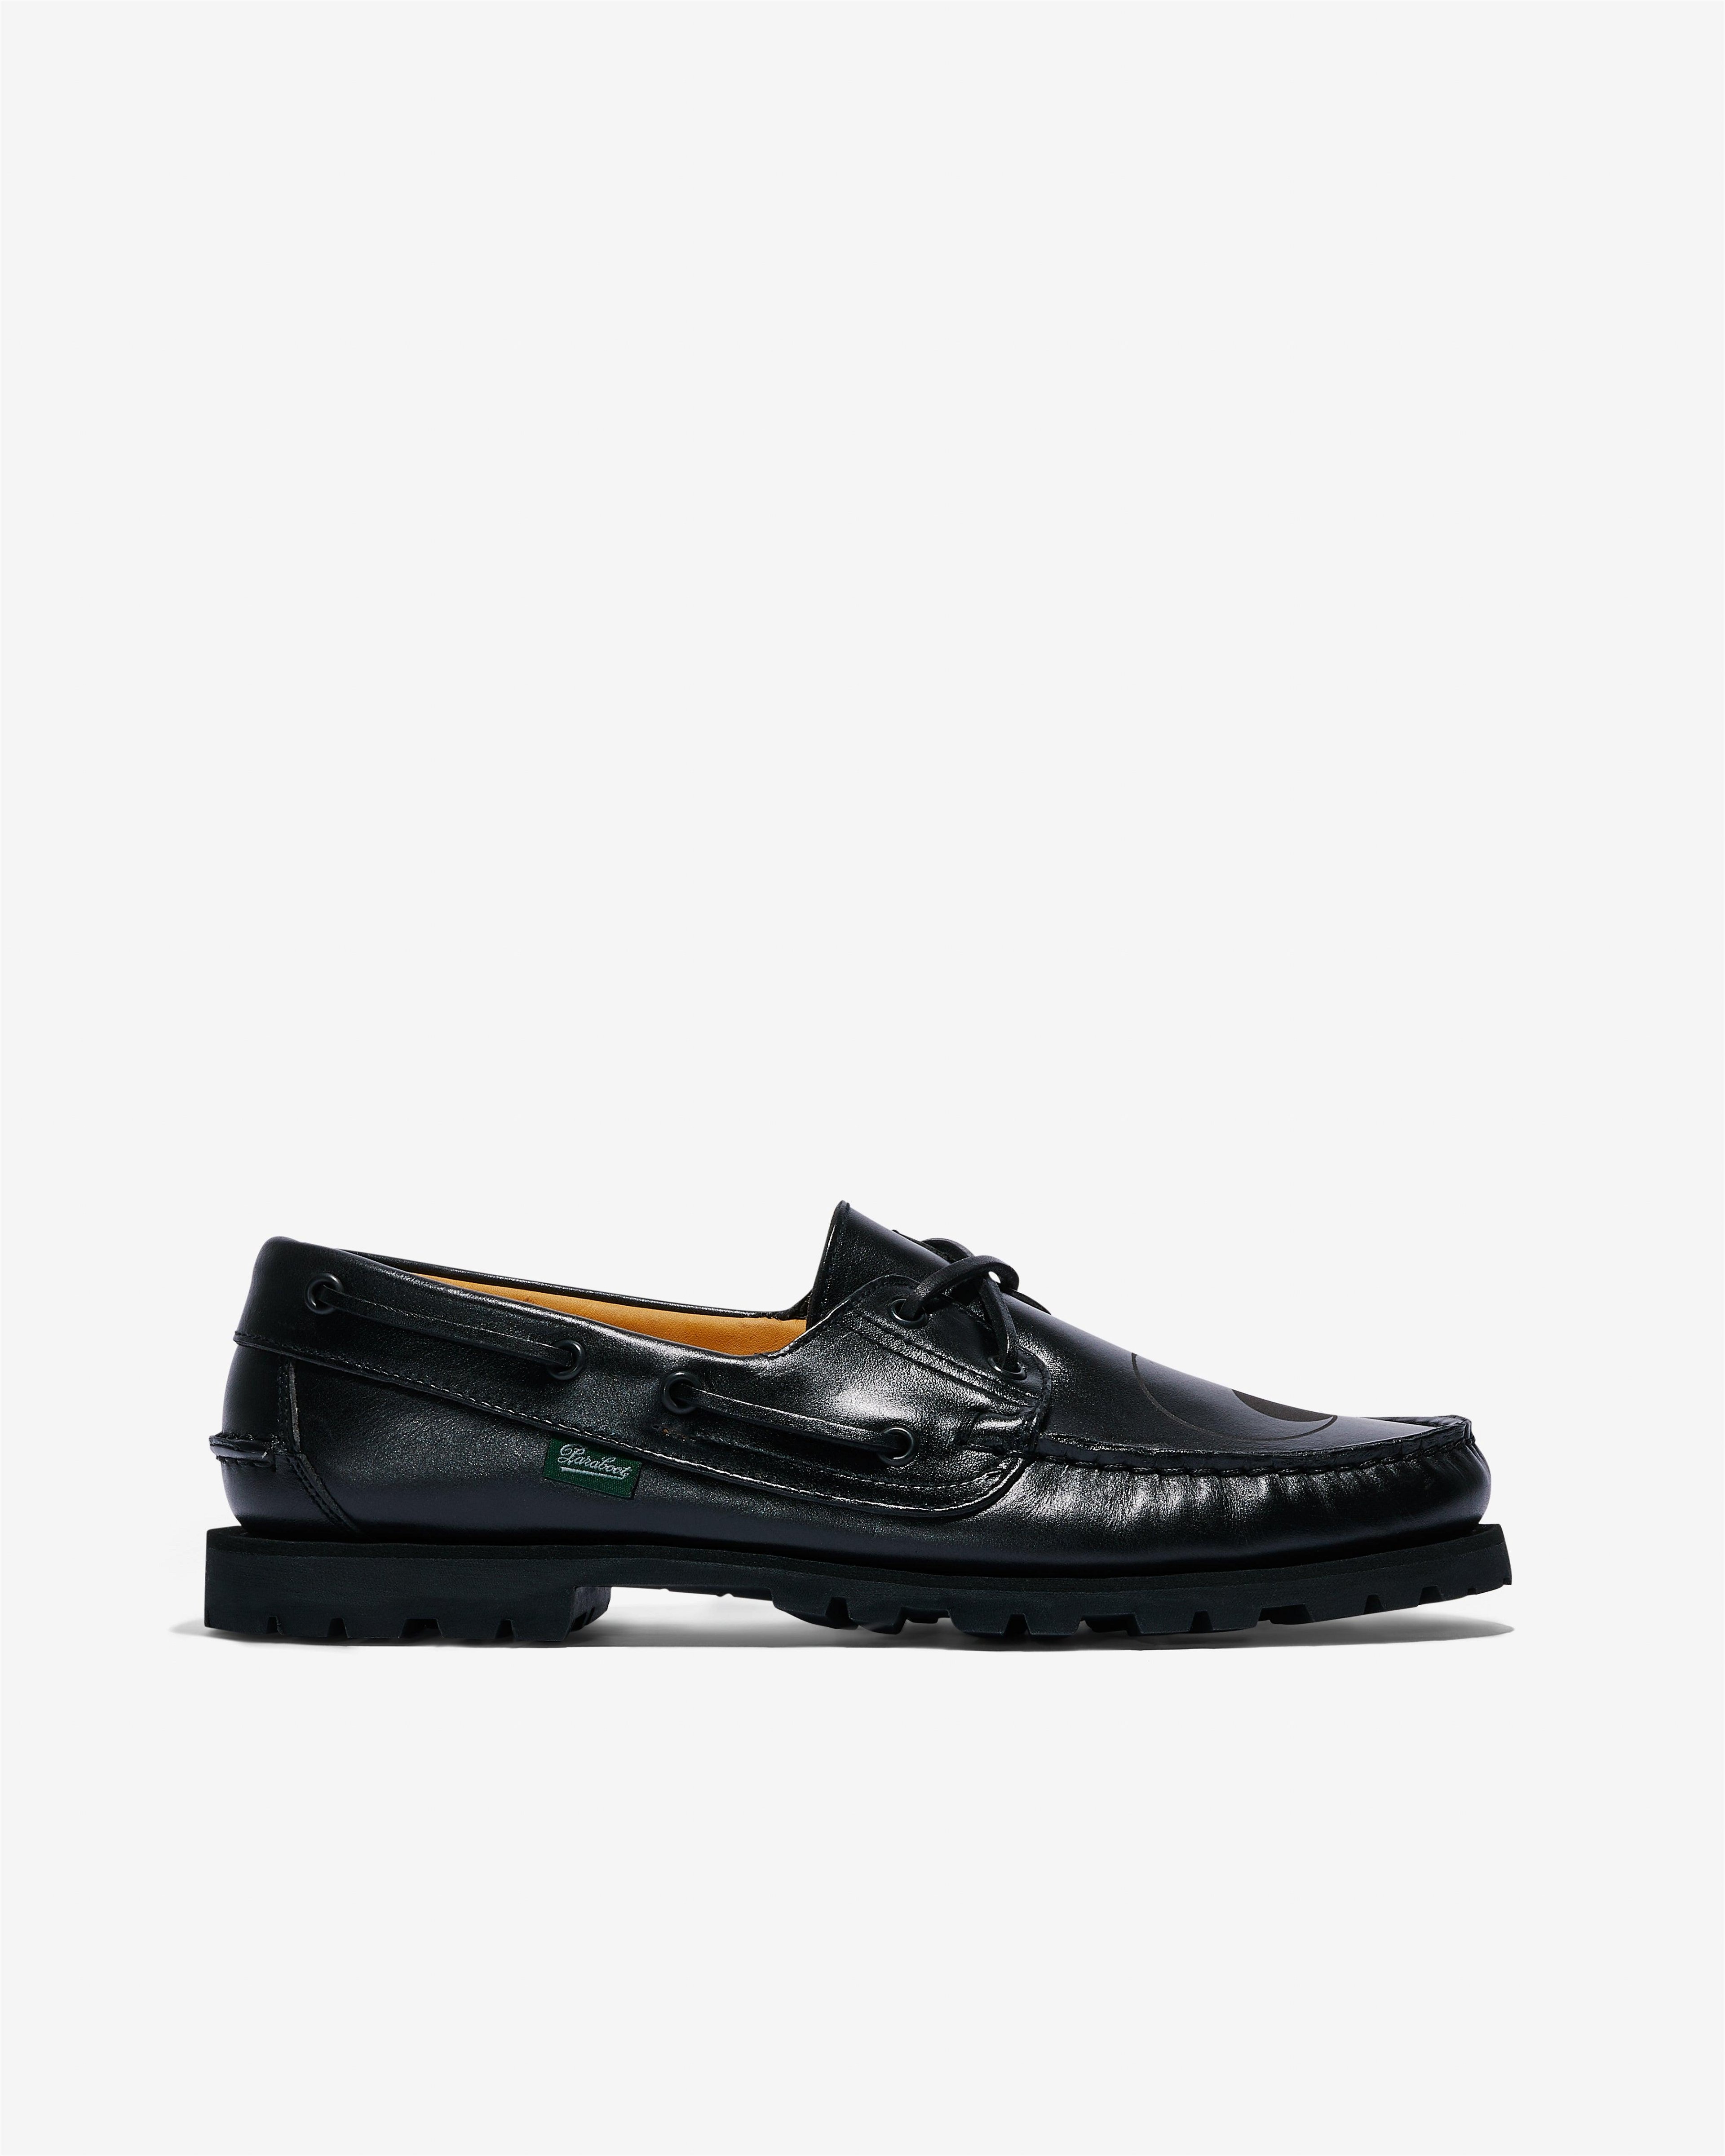 Our Legacy - Men's Paraboot Malo Boat Shoe - (Black) by OUR LEGACY